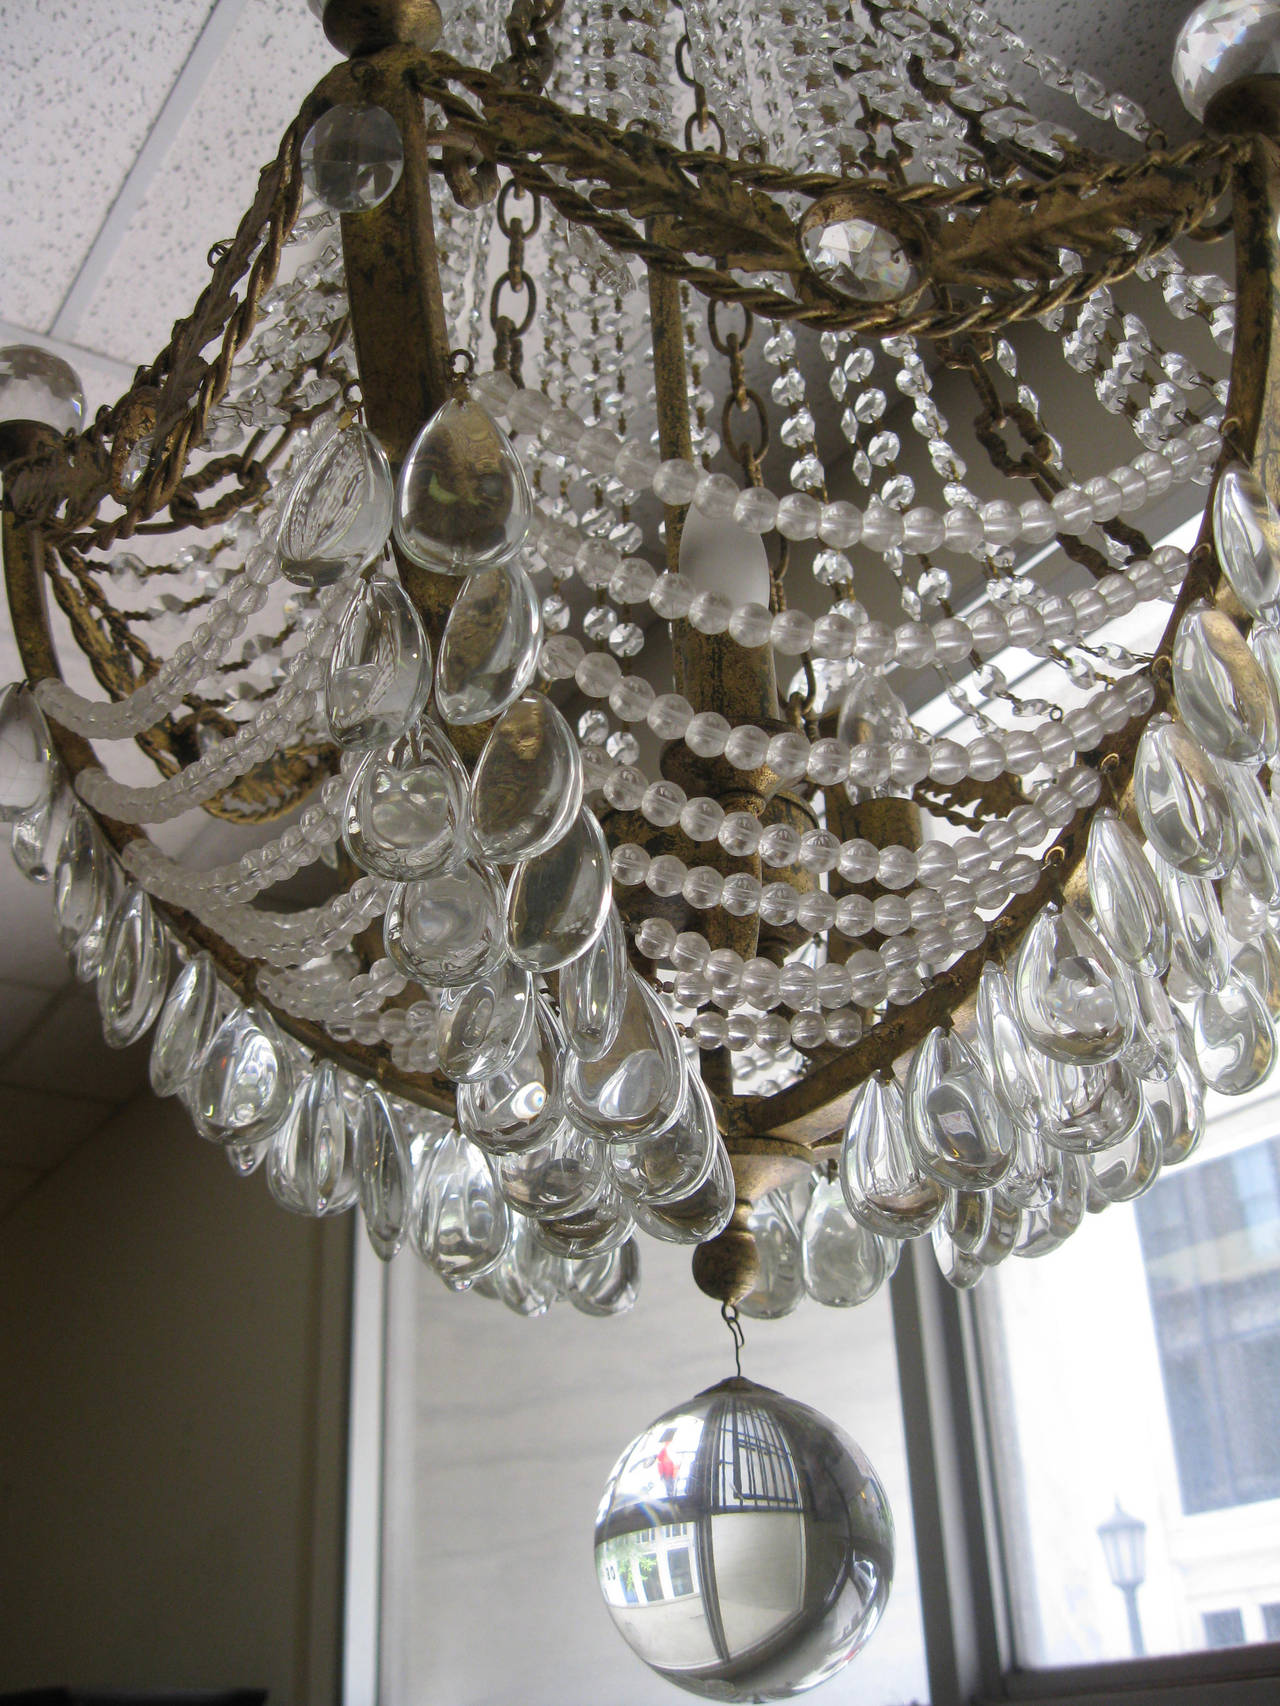 Original waterfall chandelier from the old interior of the Russian Tea room in New York City. Featuring lovely doré bronze and crystal, this gorgeous chandelier, circa 1920s, has an elegant elongated shape with highlights including five styles of